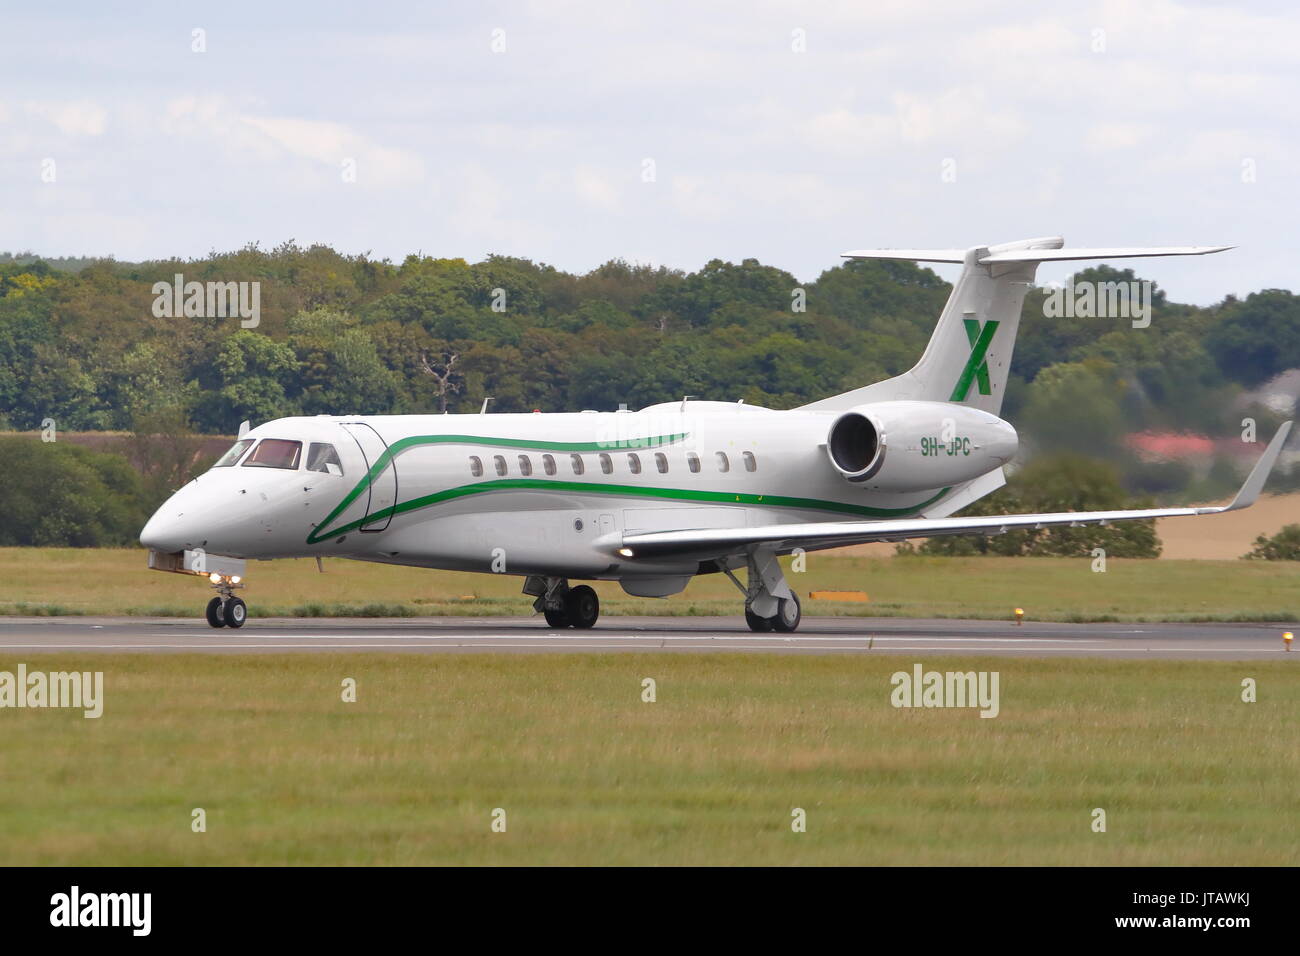 Air X Embraer Legacy 600 9H-JPC taking off from London Luton Airport, UK Stock Photo